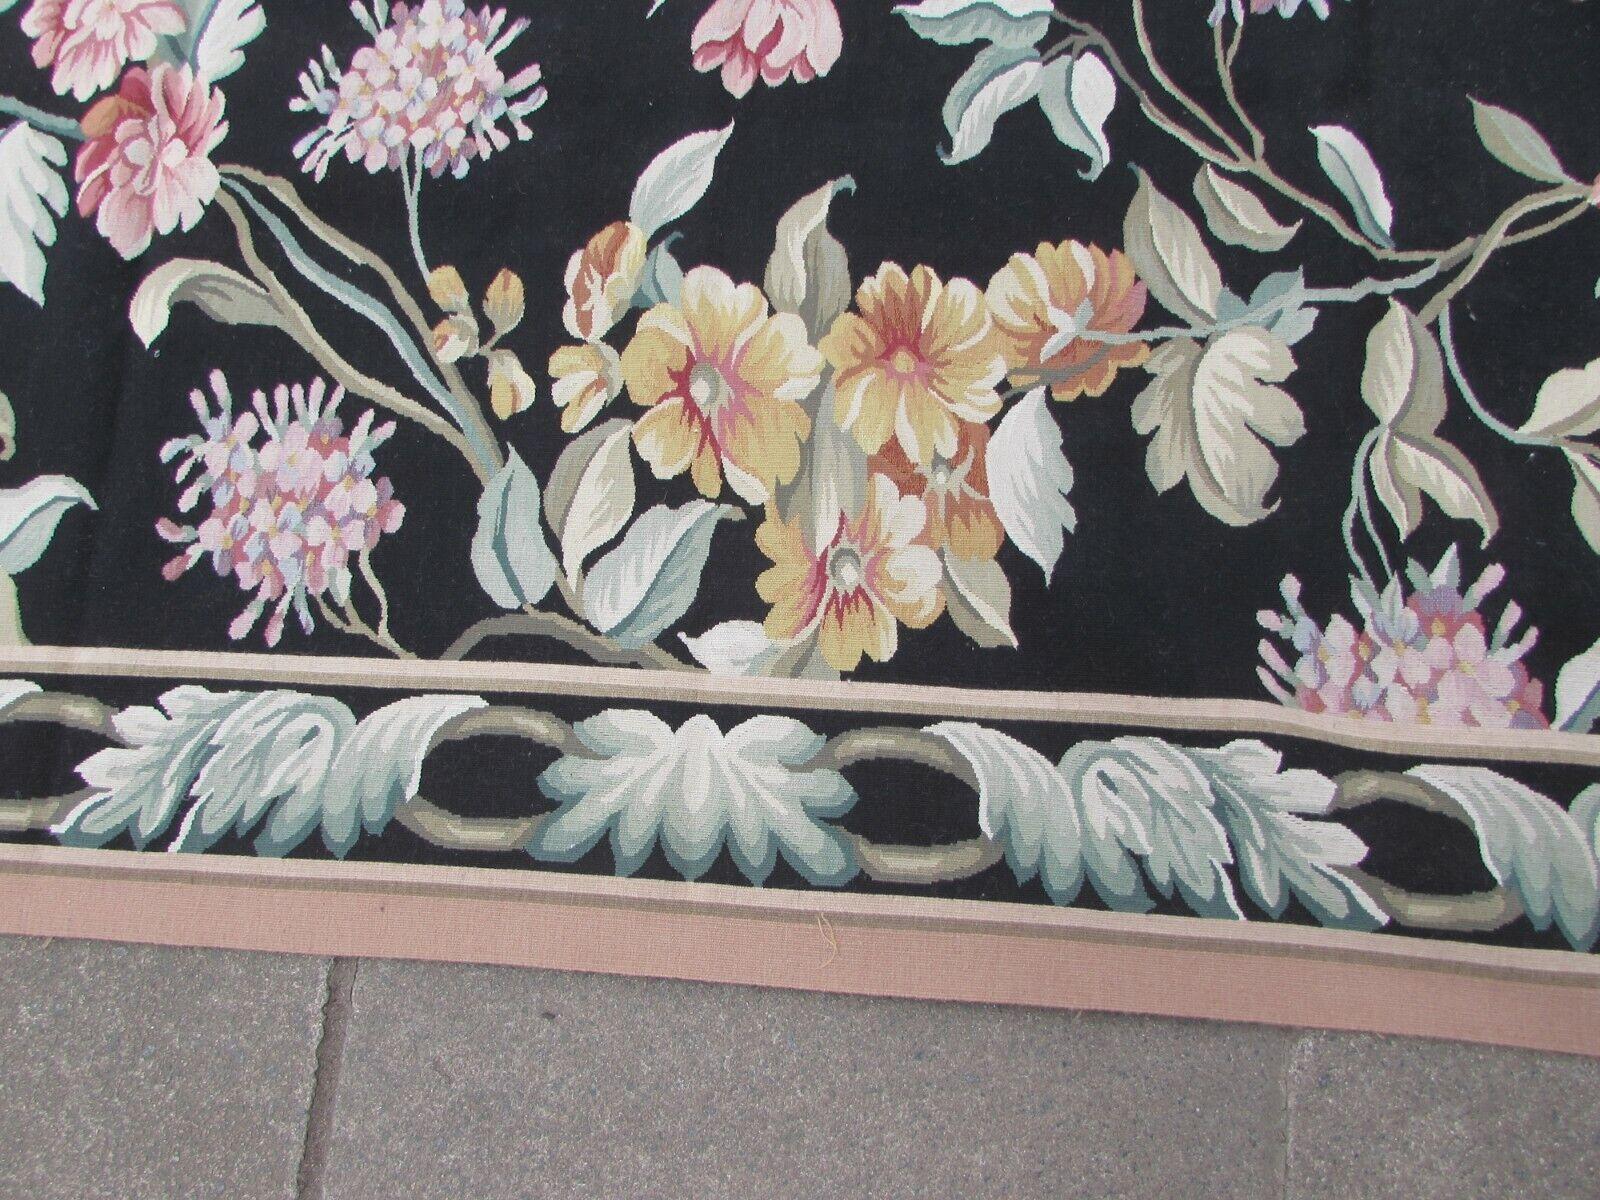 Handmade Vintage French Aubusson Rug 8.8' x 12.2', 1970s, 1Q51 For Sale 4